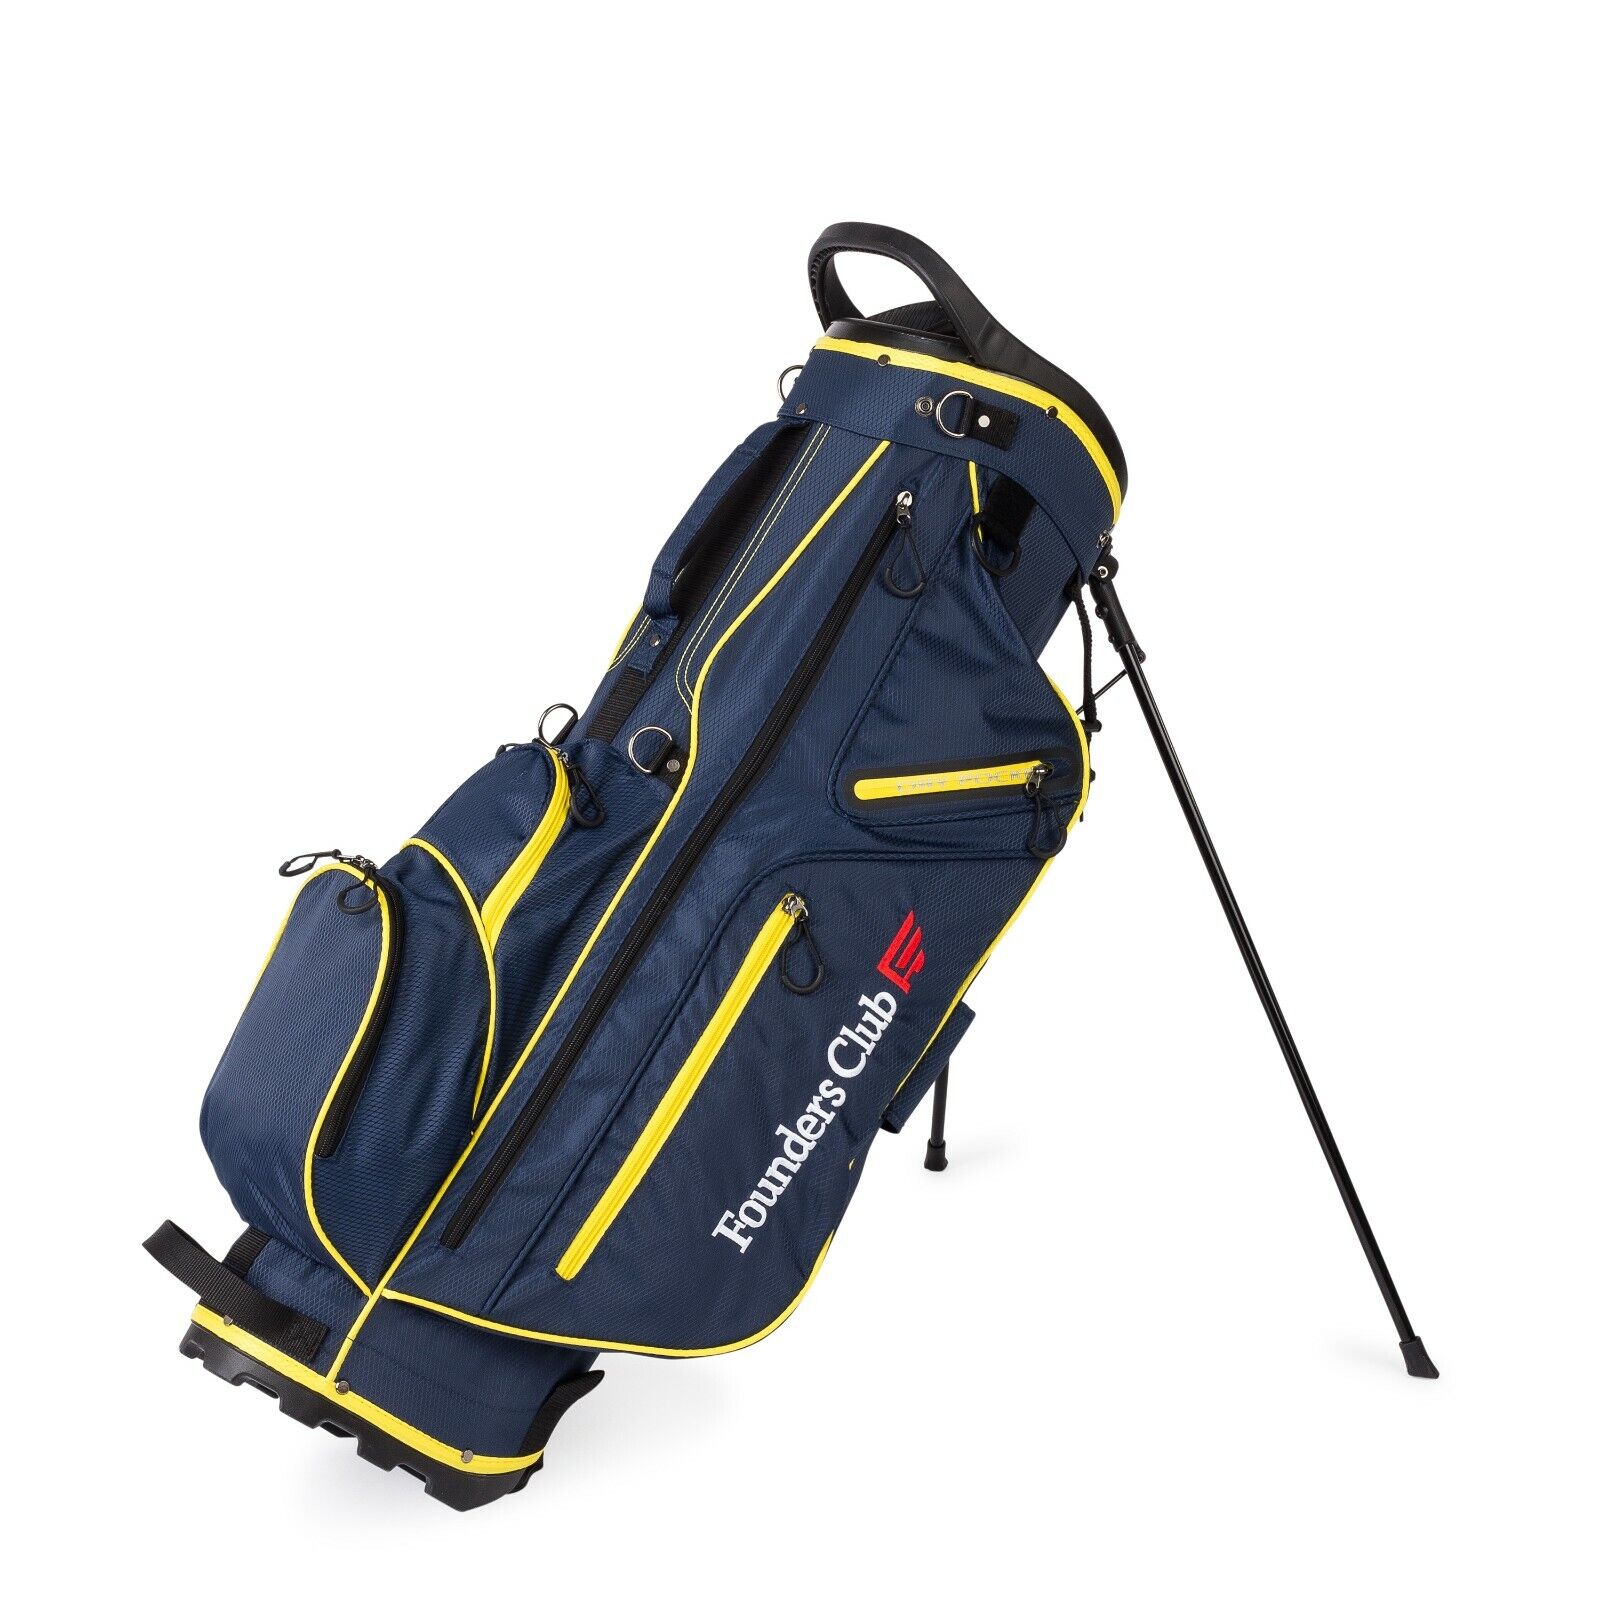 Founders Club Golf Stand Bag with 14-way top